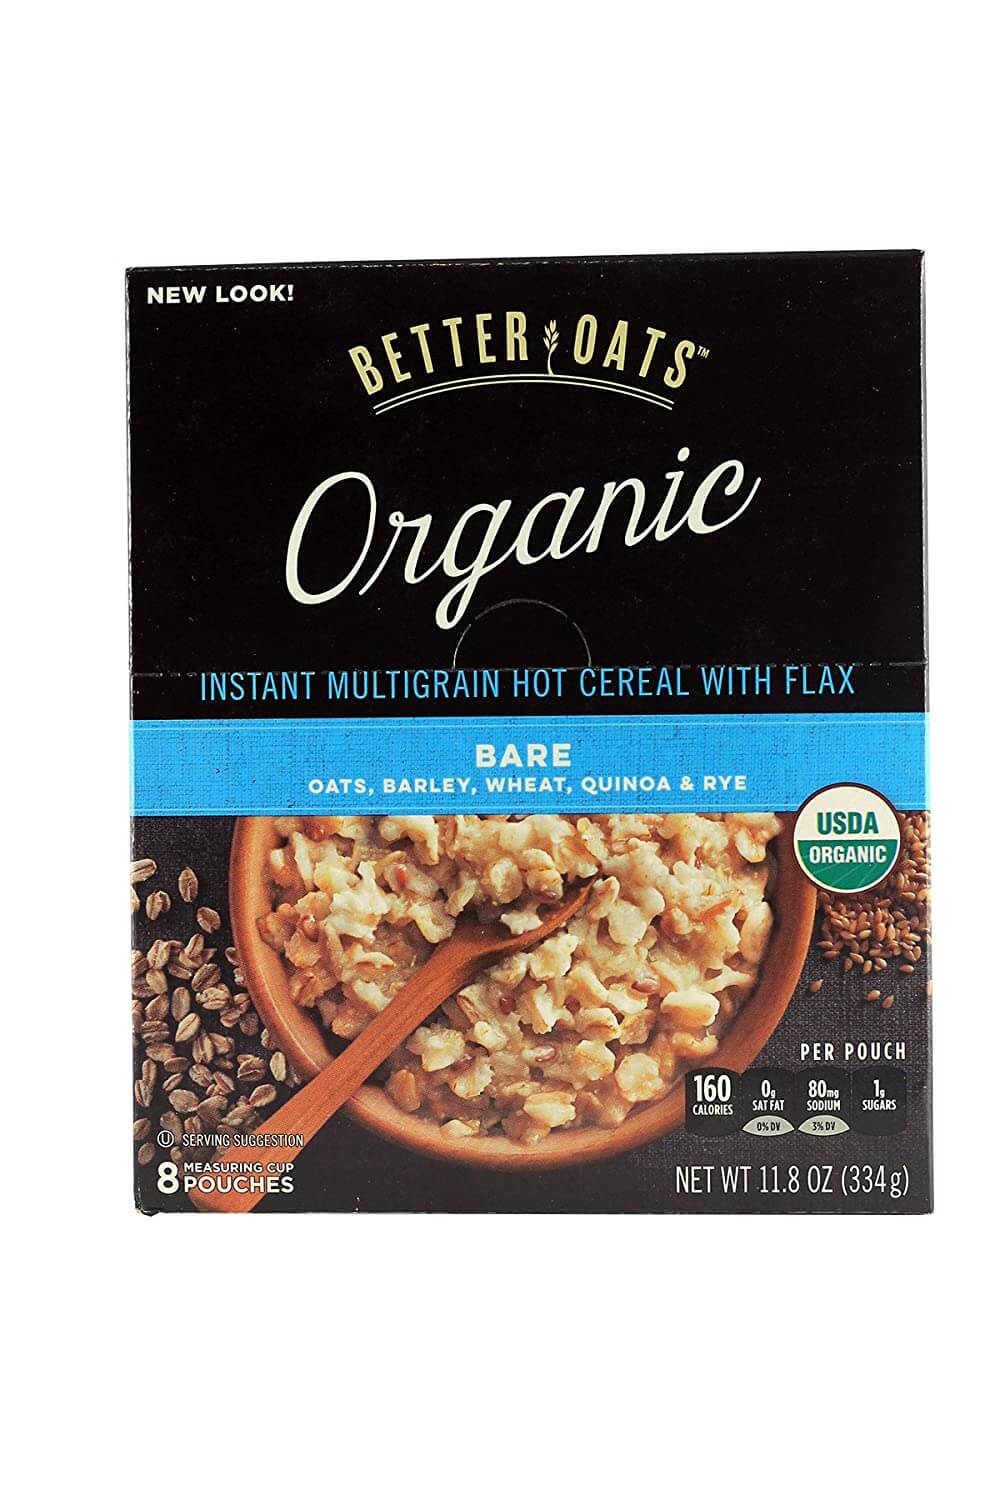 Better Oats Original Steel Cut Instant Oatmeal with Flax